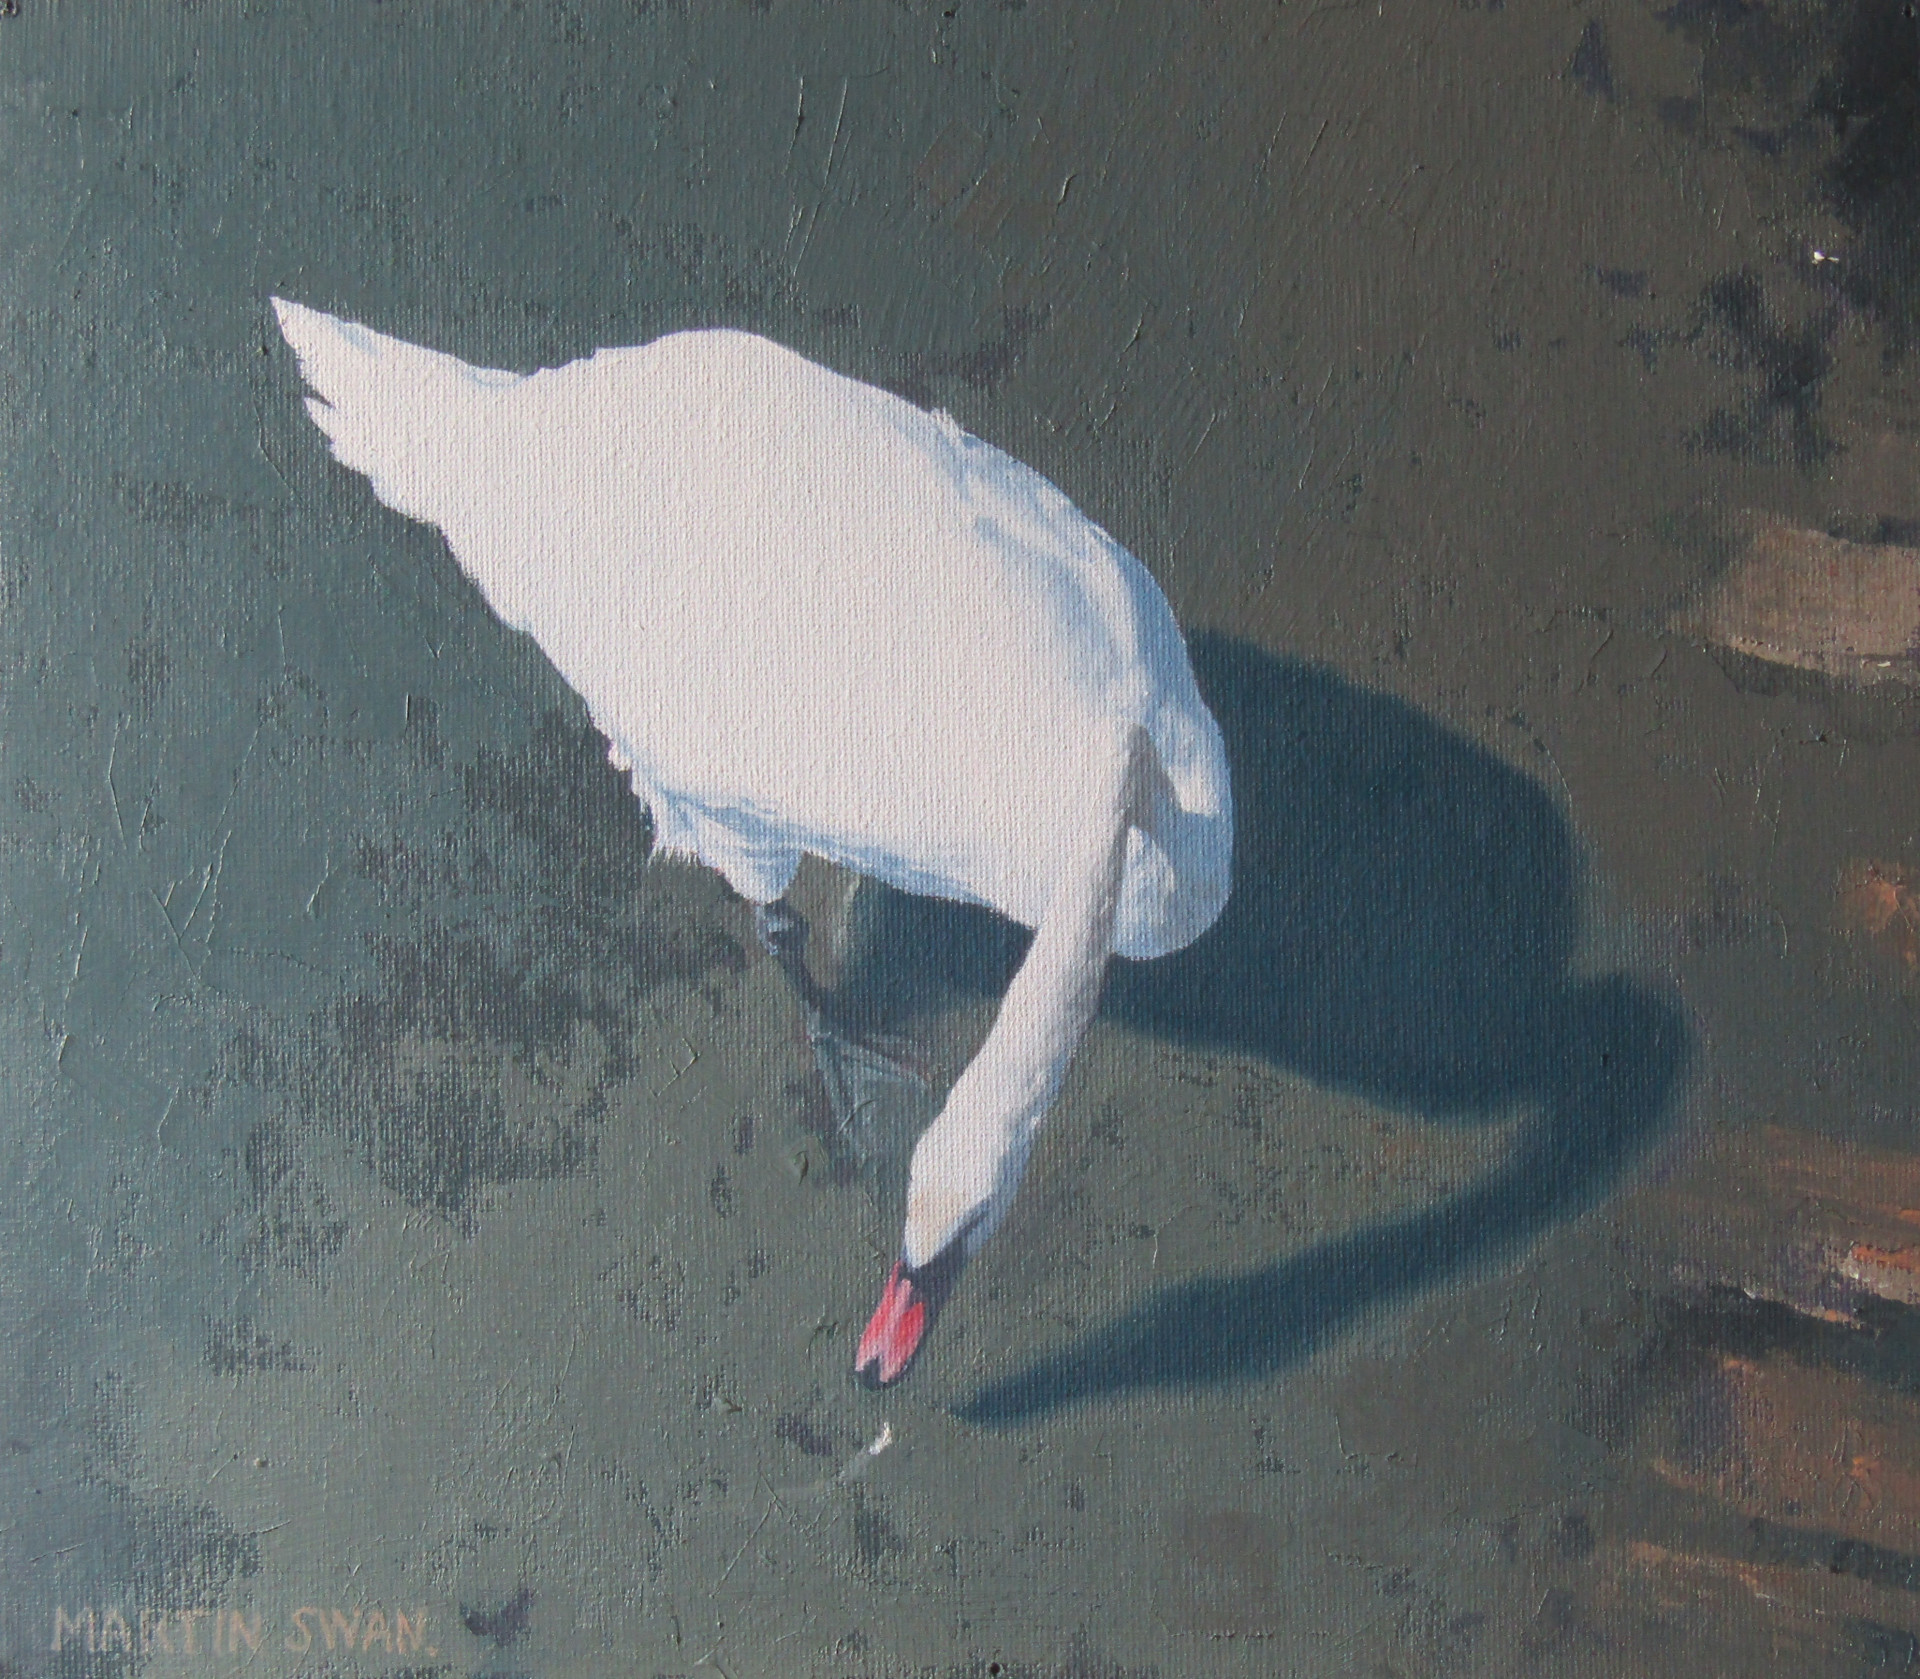 a square image, the background of which is textured grey marl or mud. Diagonally across the image from top left to bottom right is a white swan. The swan is viewed from above and the beak and head are in the bottom right corner